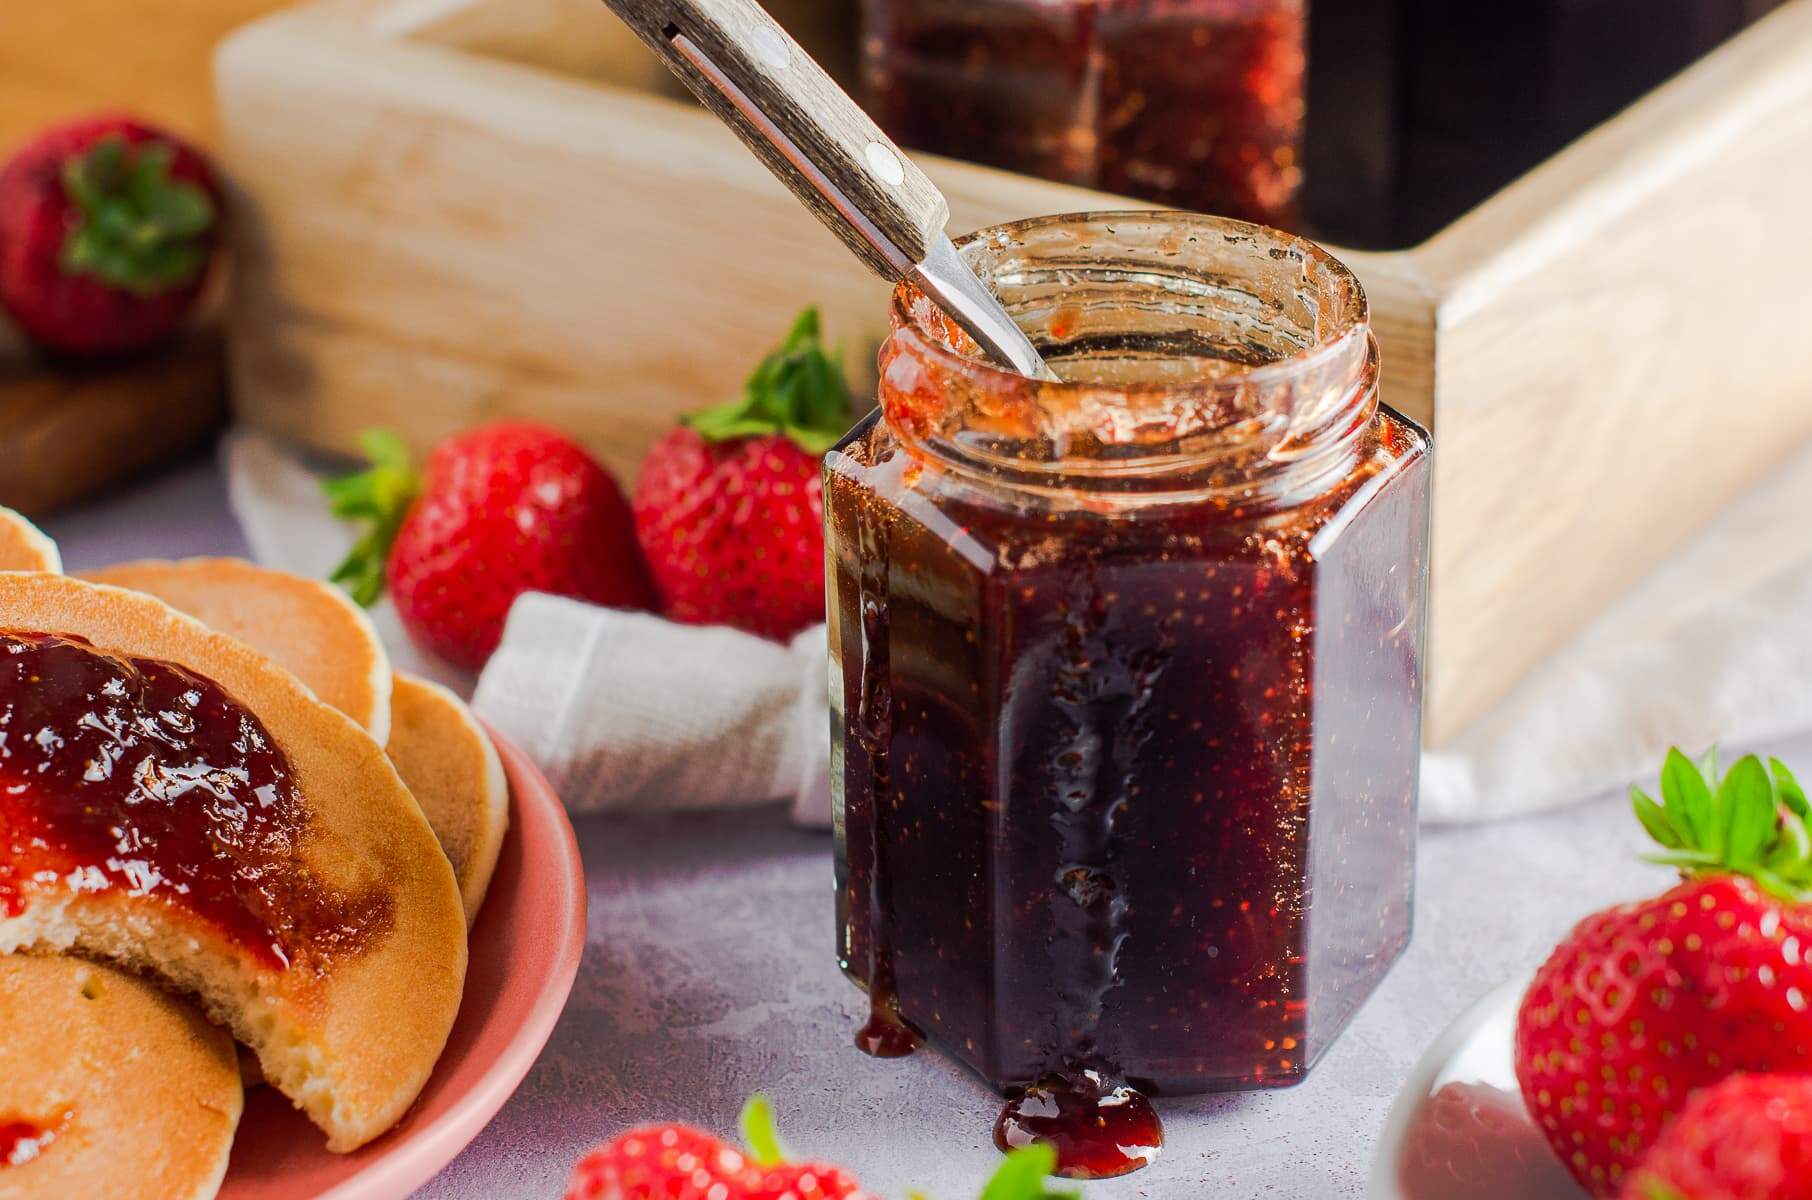 A jar of jam, pancakes topped with strawberry jam, some fresh berries and extra jars to the back.